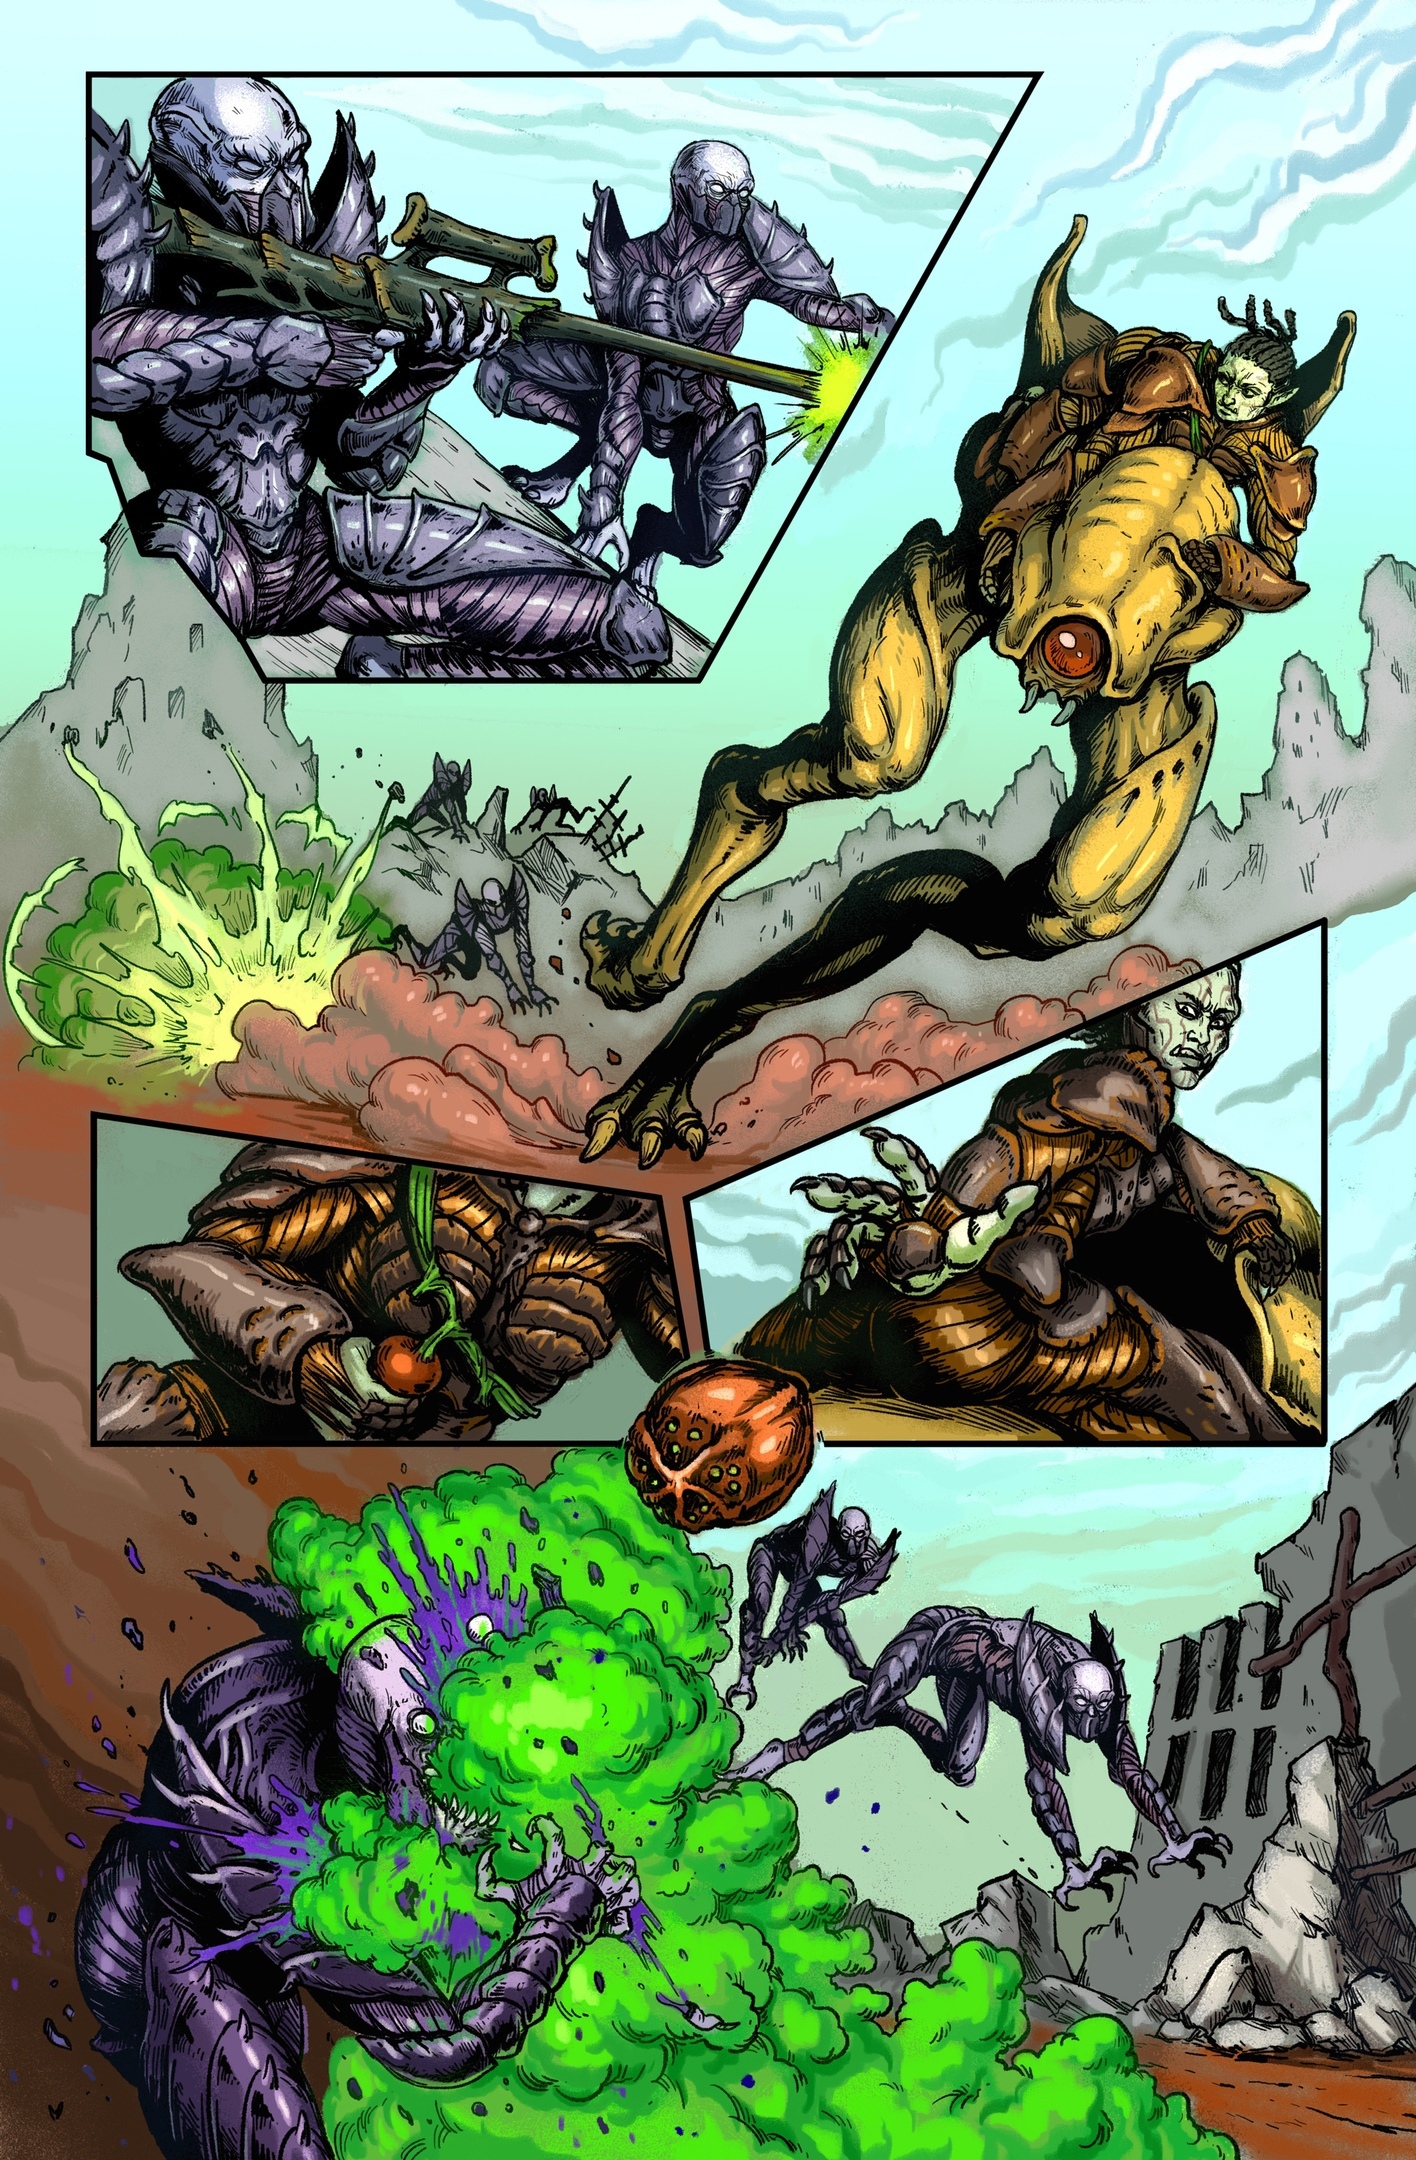 New pages of the comic Covenantum: The Great Ancestors. - Biopunk, Art, Science fiction, Fantasy, Fantasy, Monster, Post apocalypse, Characters (edit), Comics, Web comic, Orcs, The author's world, Fictional characters, Fictional universe, Comicsbook, Action, Longpost, Author's comic